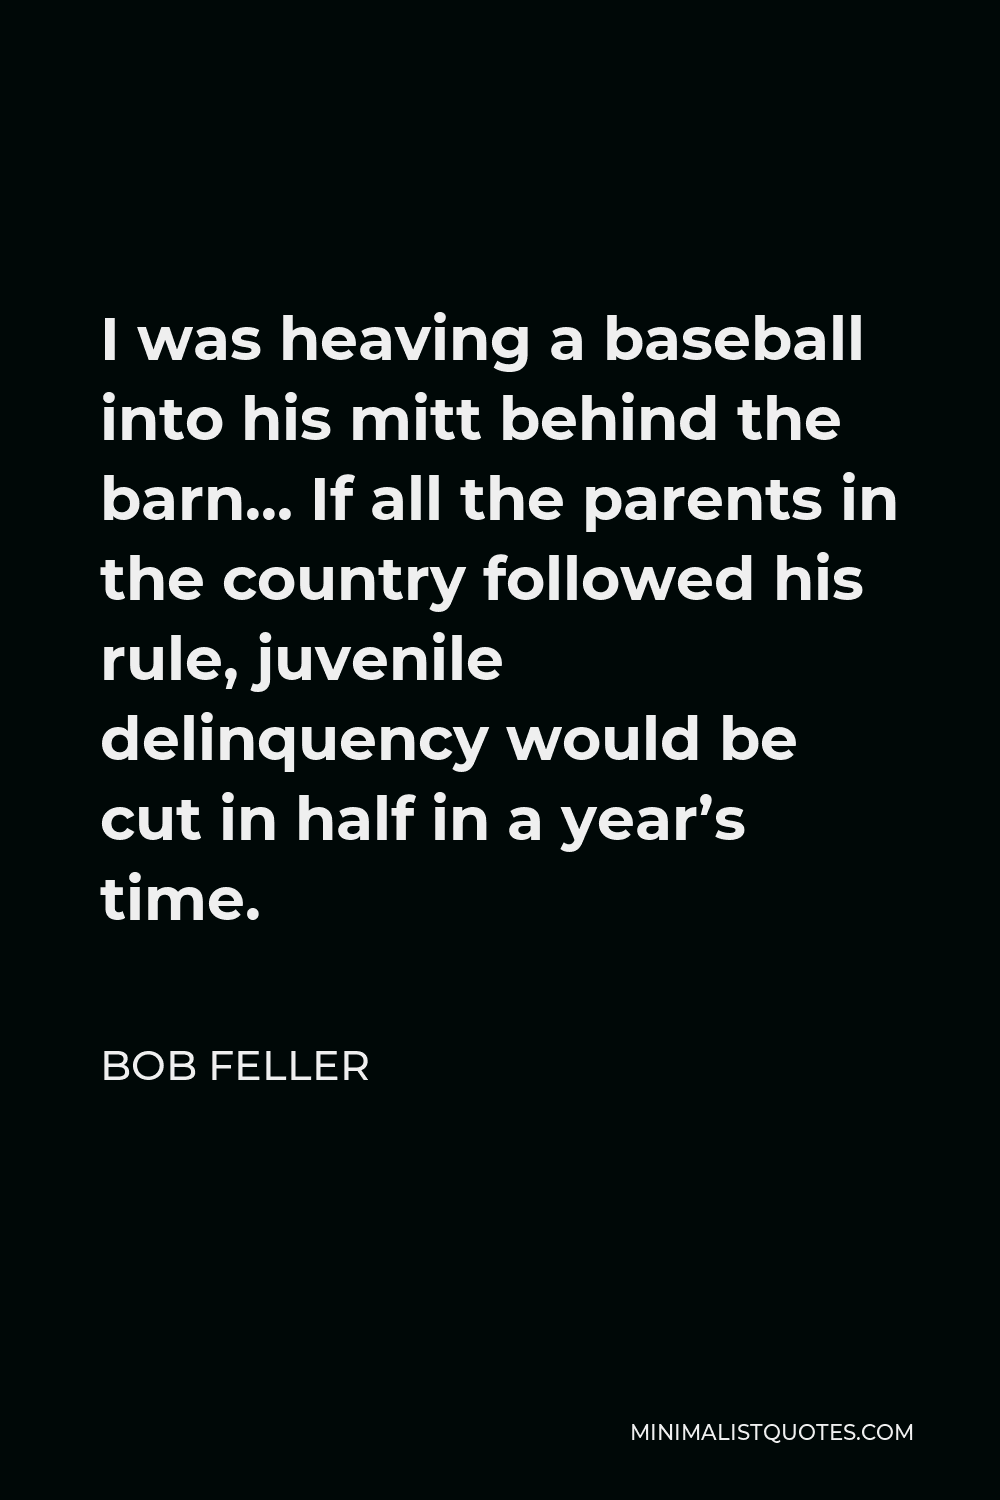 Bob Feller Quote - I was heaving a baseball into his mitt behind the barn… If all the parents in the country followed his rule, juvenile delinquency would be cut in half in a year’s time.